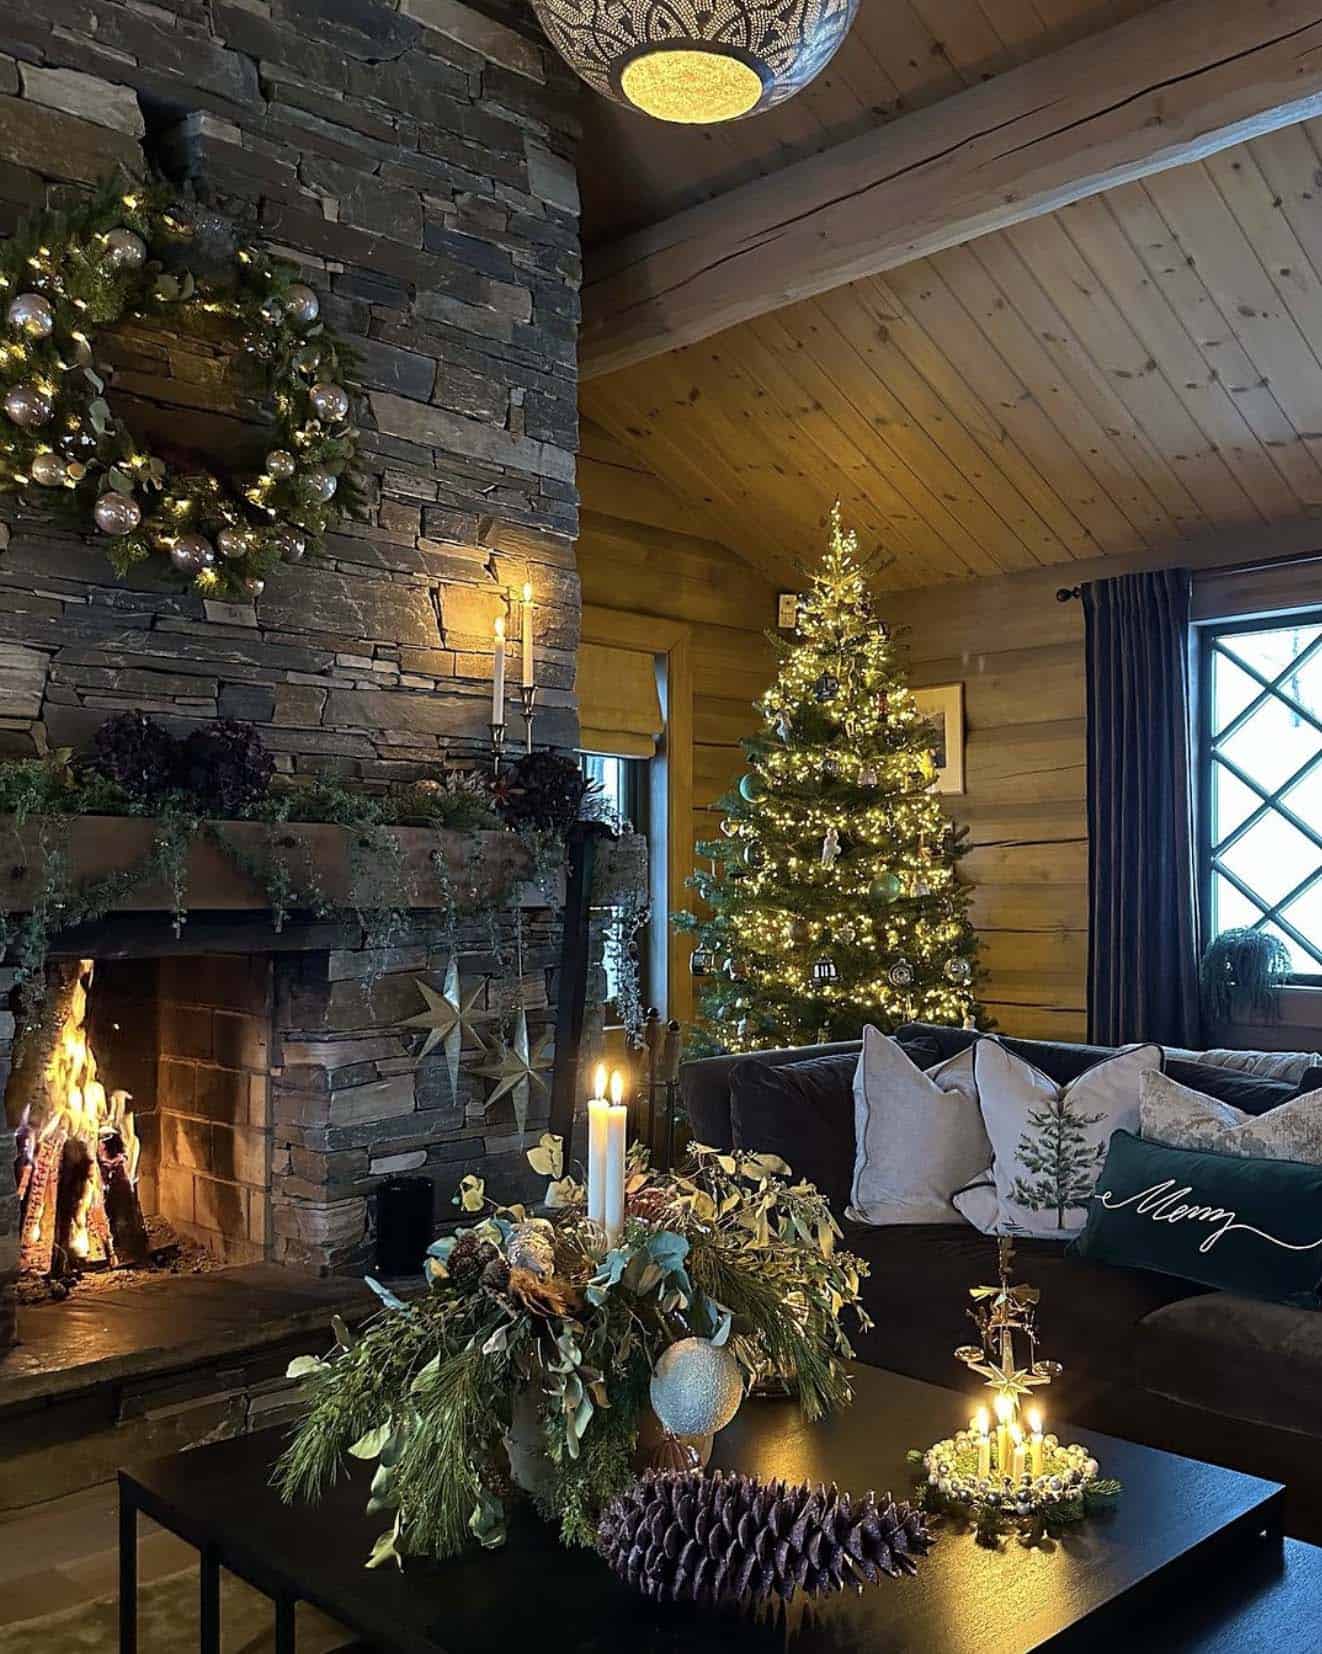 magical christmas atmosphere in the living room with a fireplace and tree